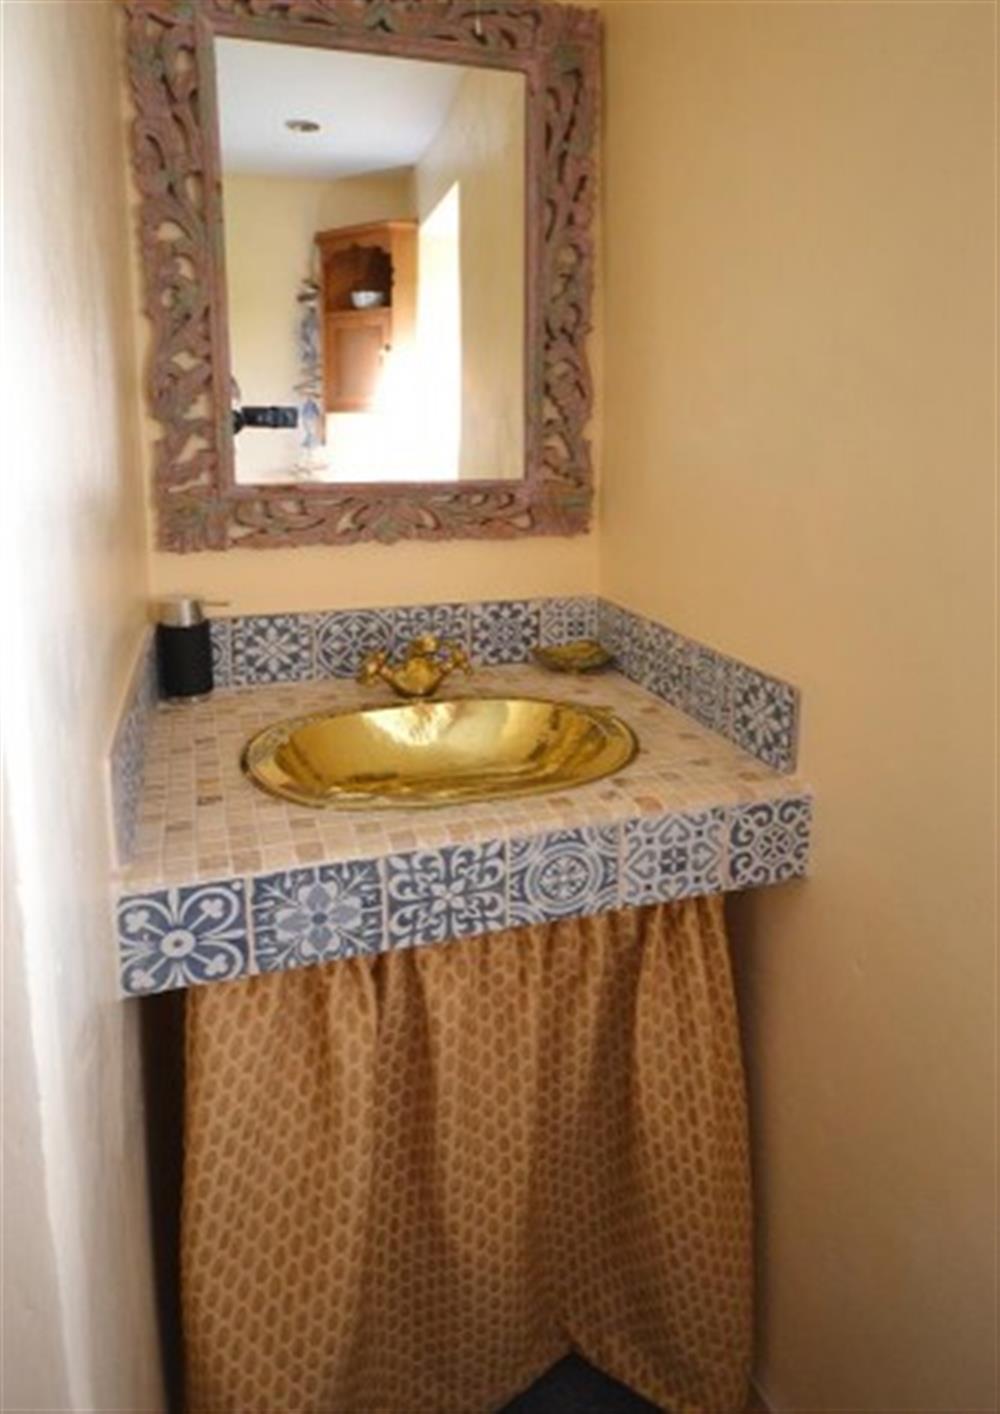 There are features of interest like this Moroccan sink